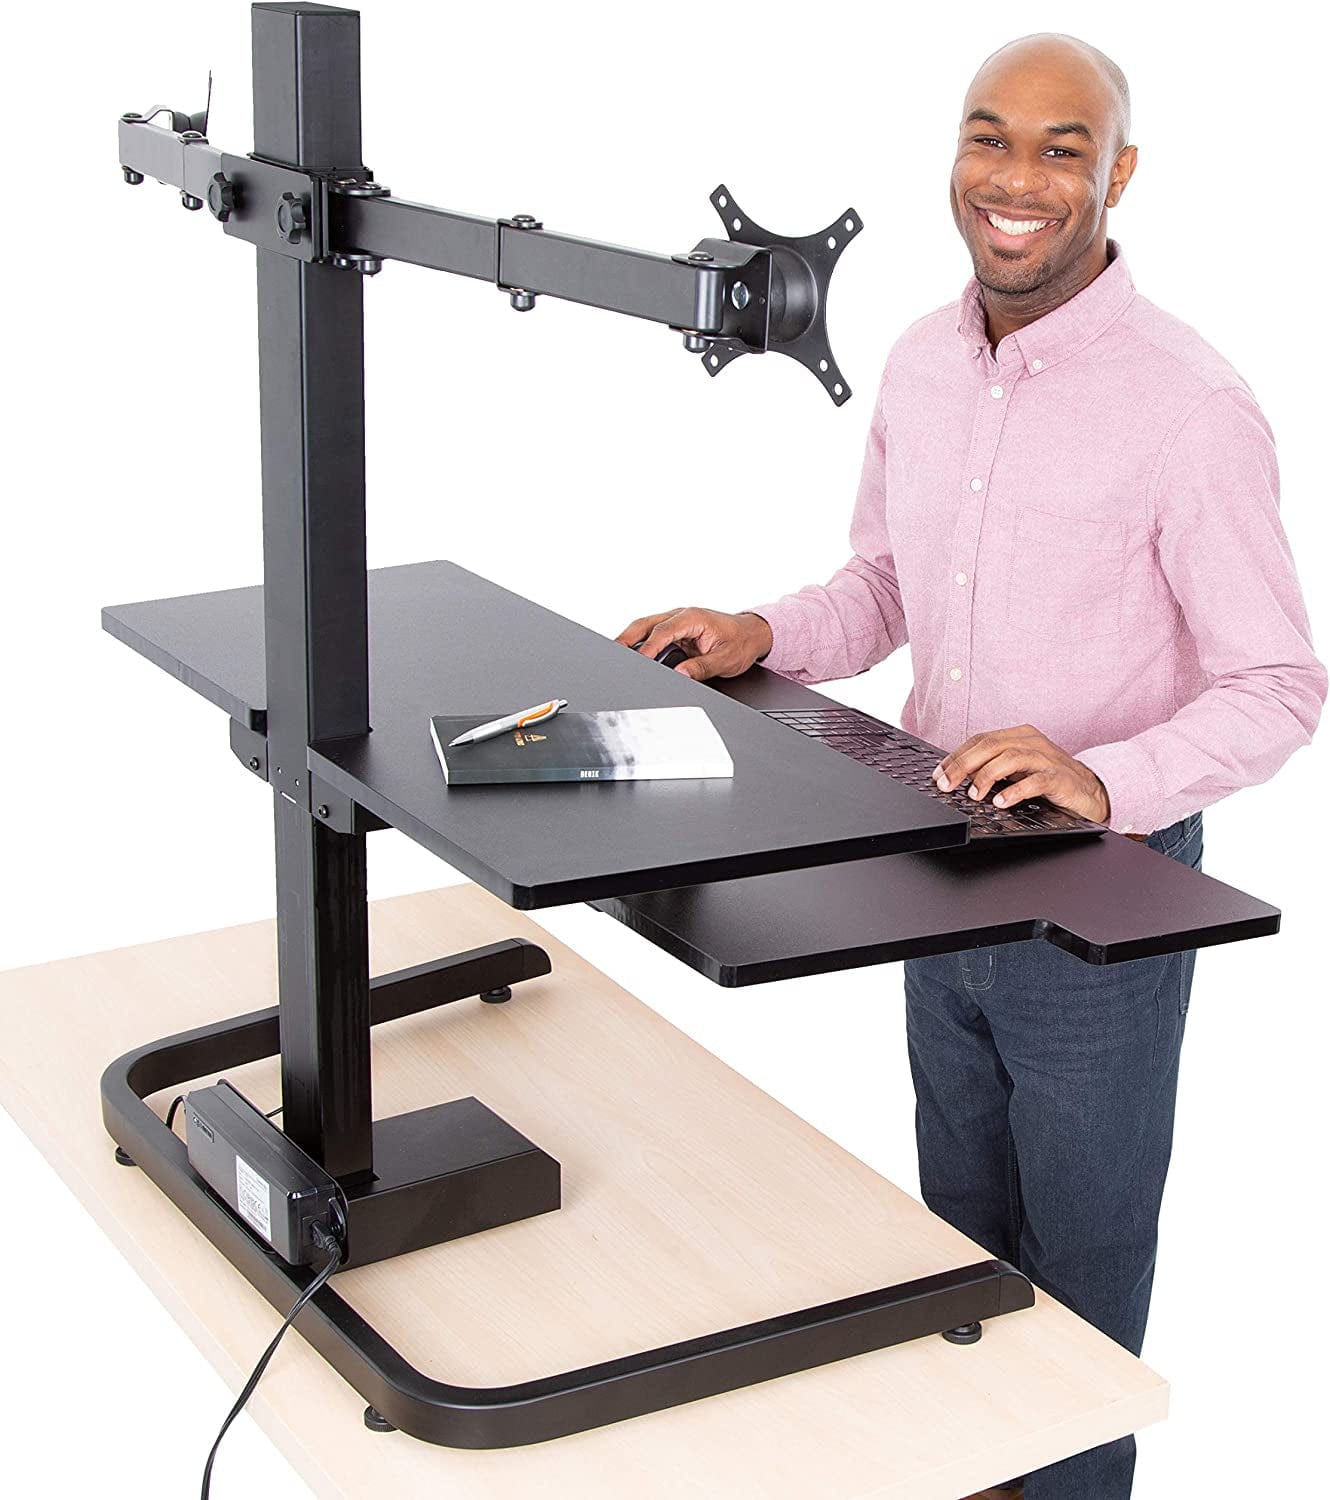 StandUp Desk Depot 2 Monitor Arms Techtonic | Electric 2 Arm Monitor Mount Standing Desk | Stand up Desk Converter with Keyboard Tray Supports 2 Screens | Easy & Quiet Sit to Stand with the Push of a Button! (Black)